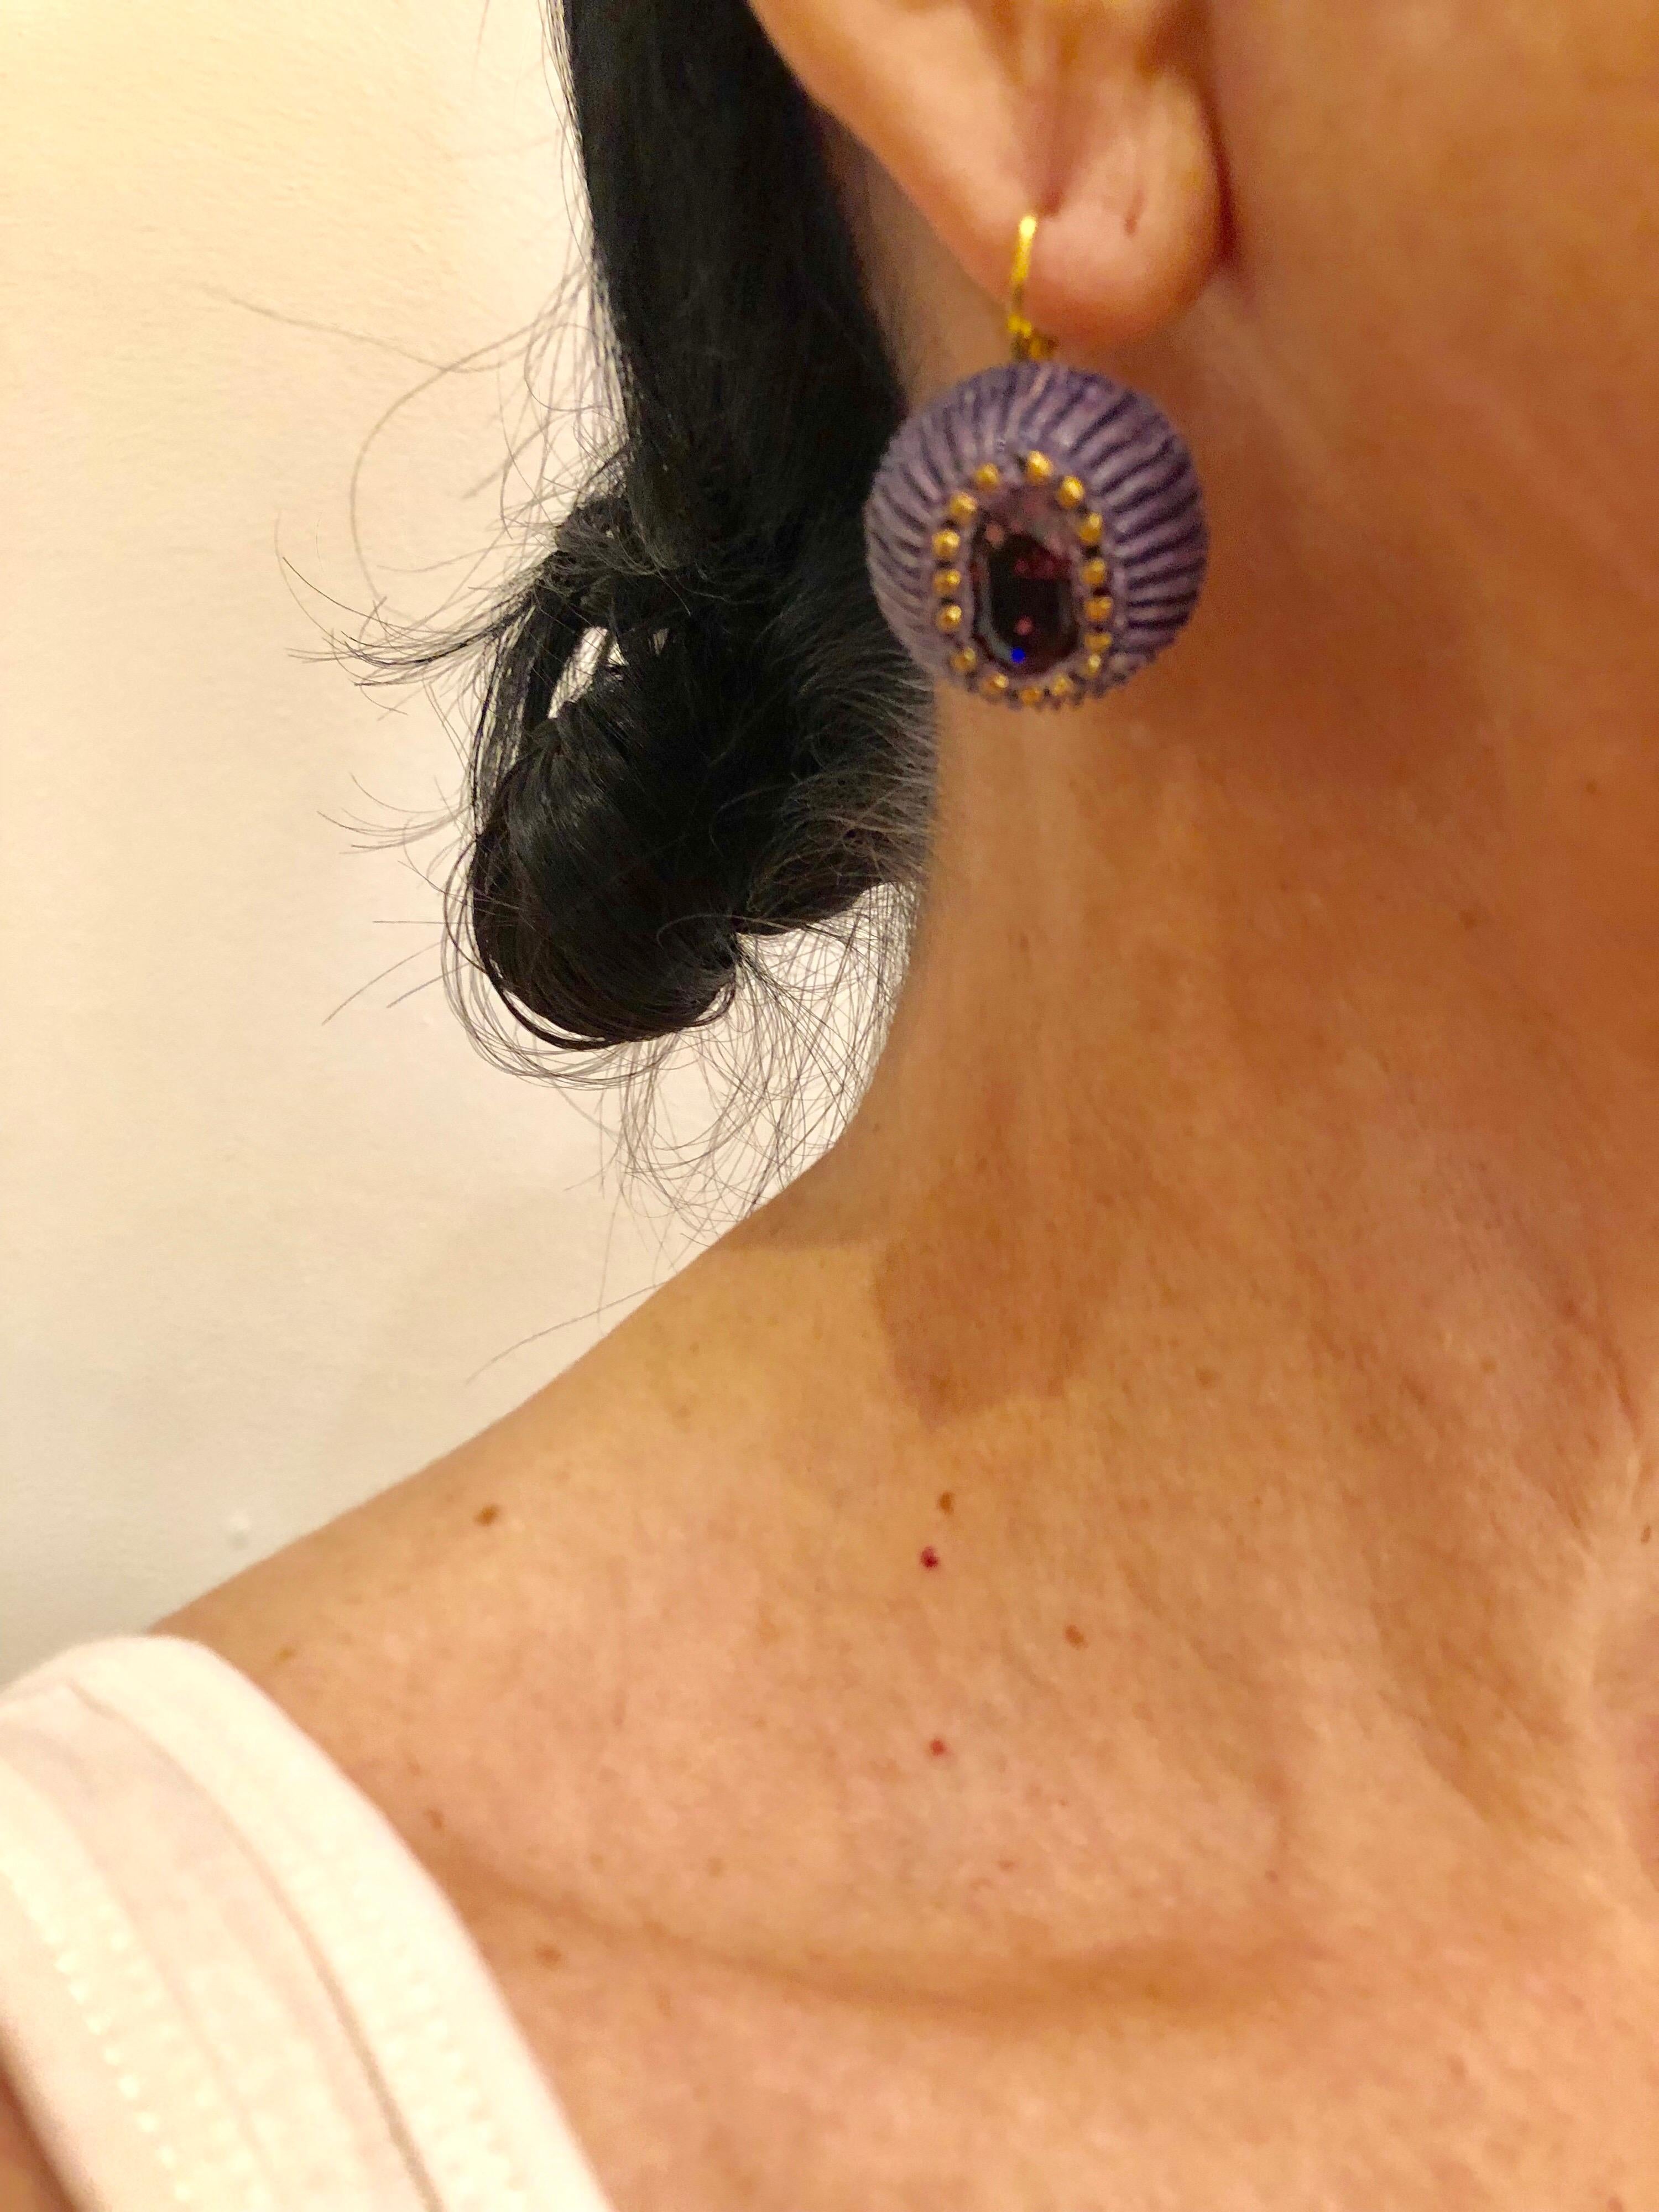 Light and easy to wear, these handmade artisanal comtemporary earrings were made in Paris by Cilea. The lightweight pierced dangle statement earrings are comprised out of purple and gold resin/enamel and feature a large glass purple rhinestone at